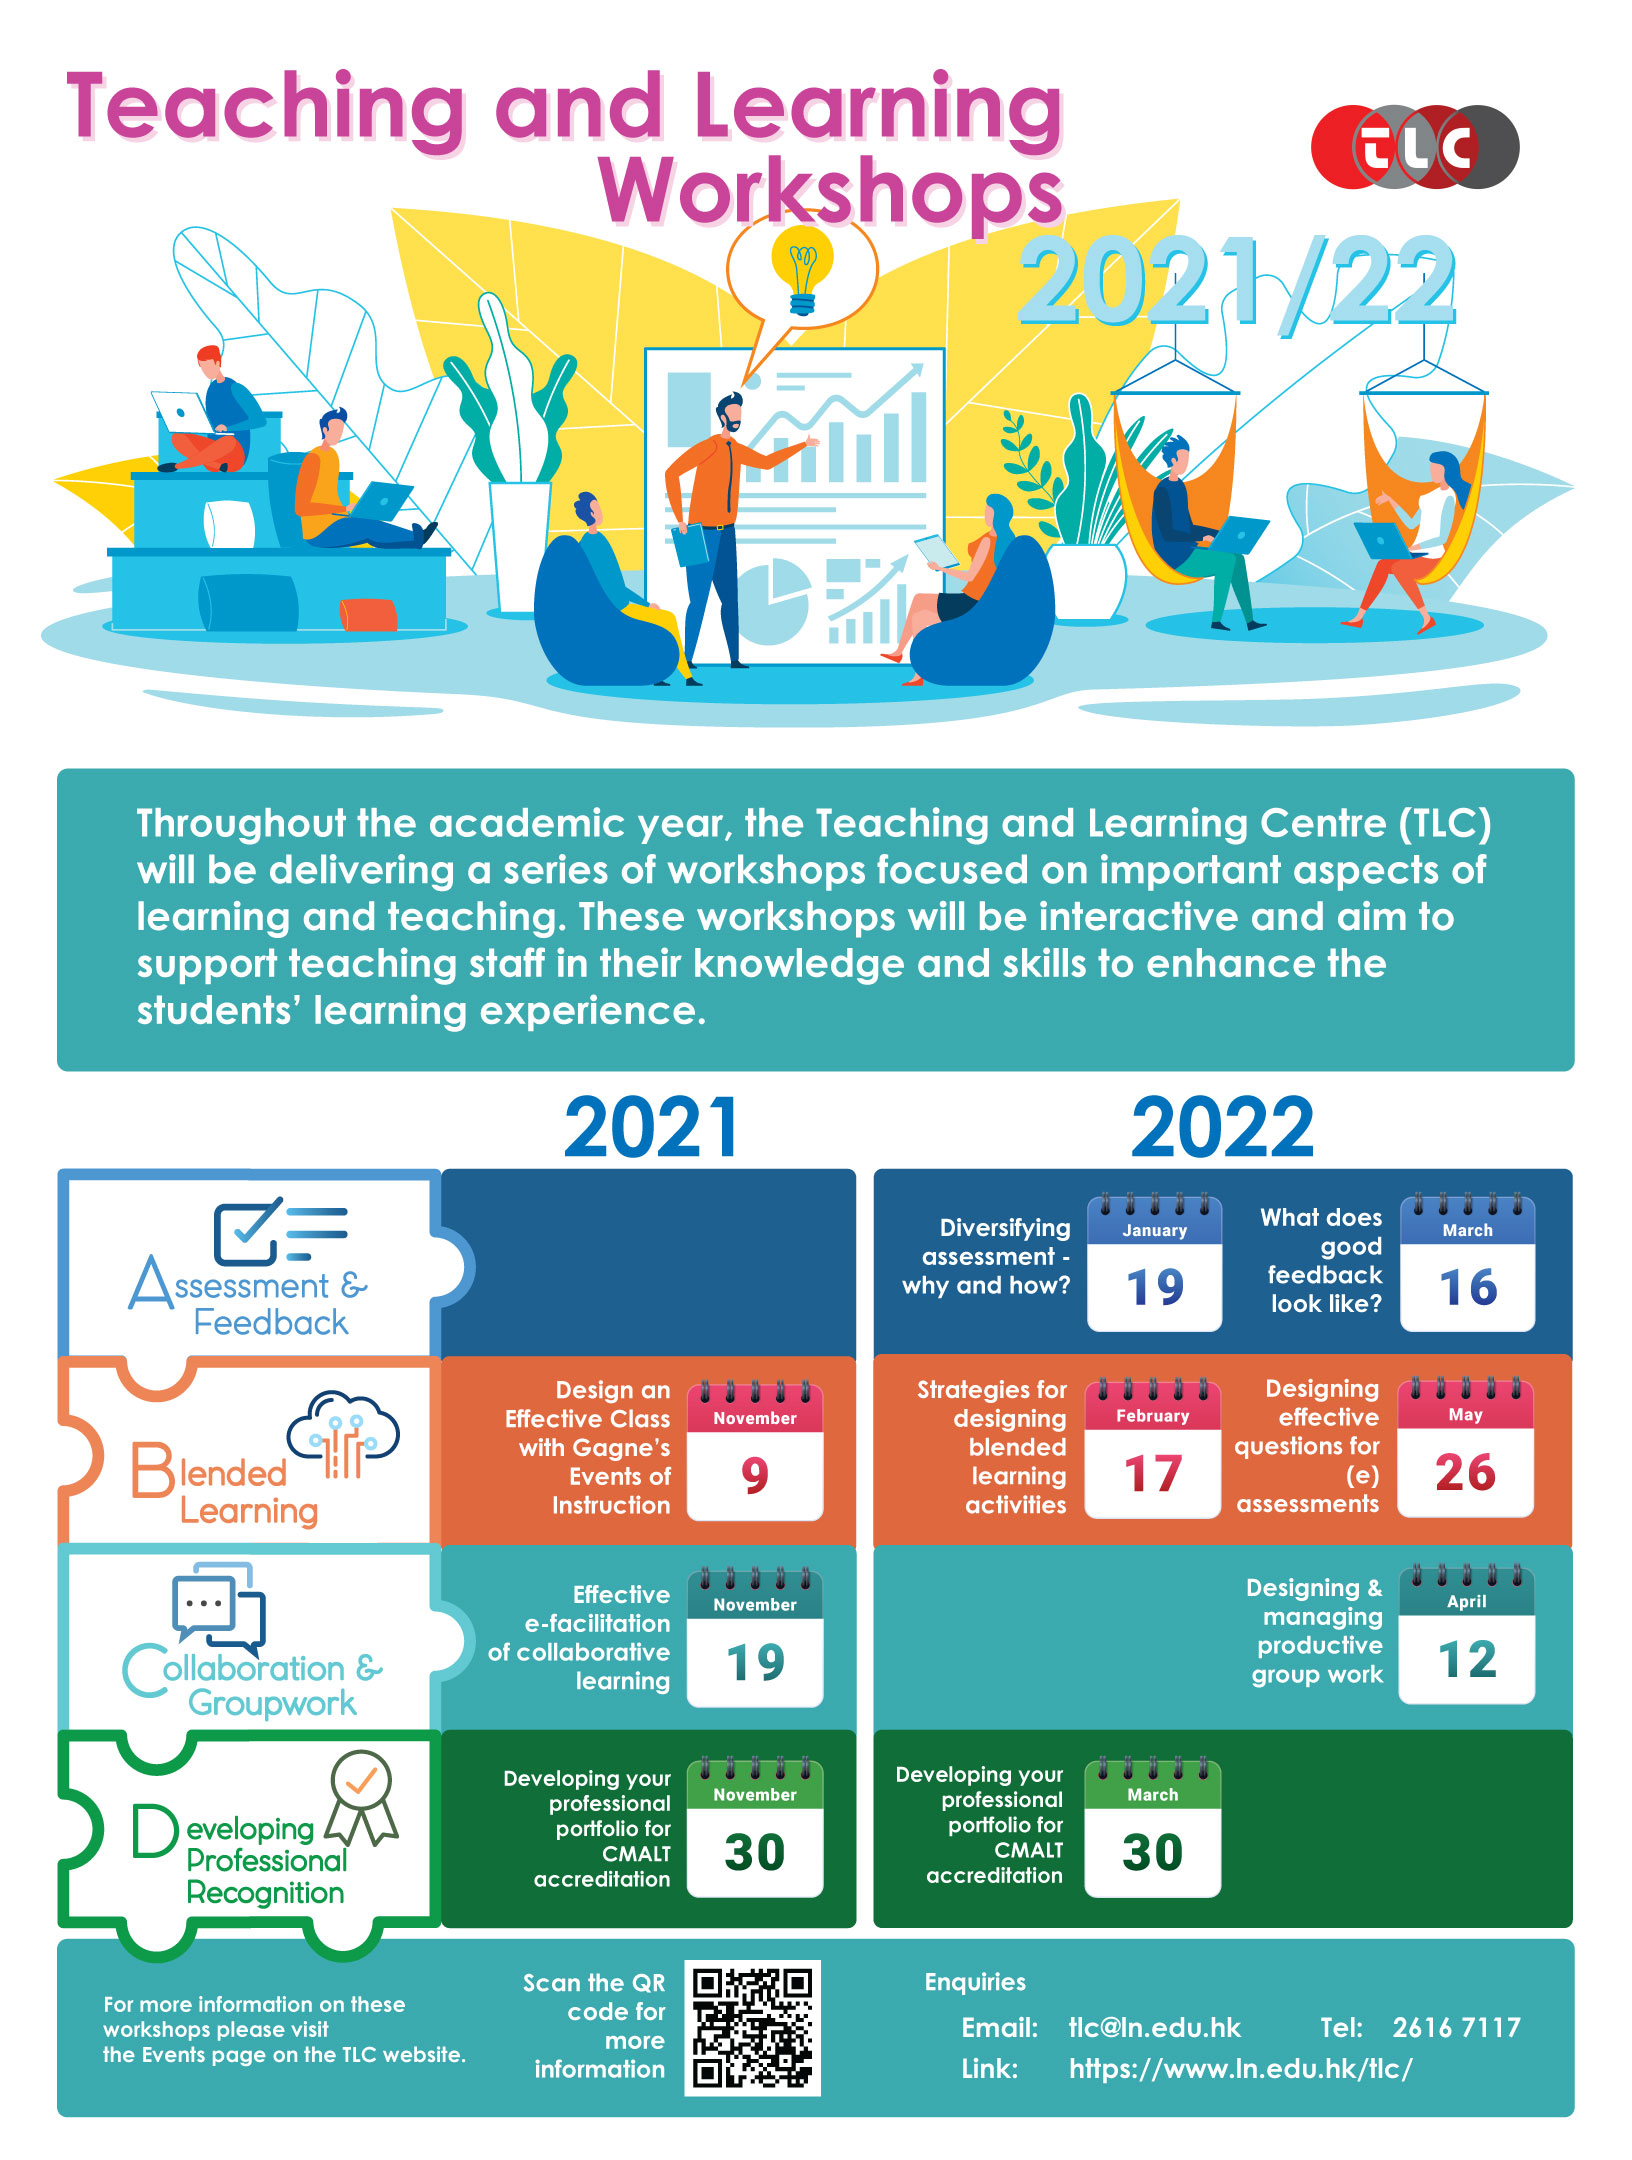 Teaching and Learning Workshops 2021/2022